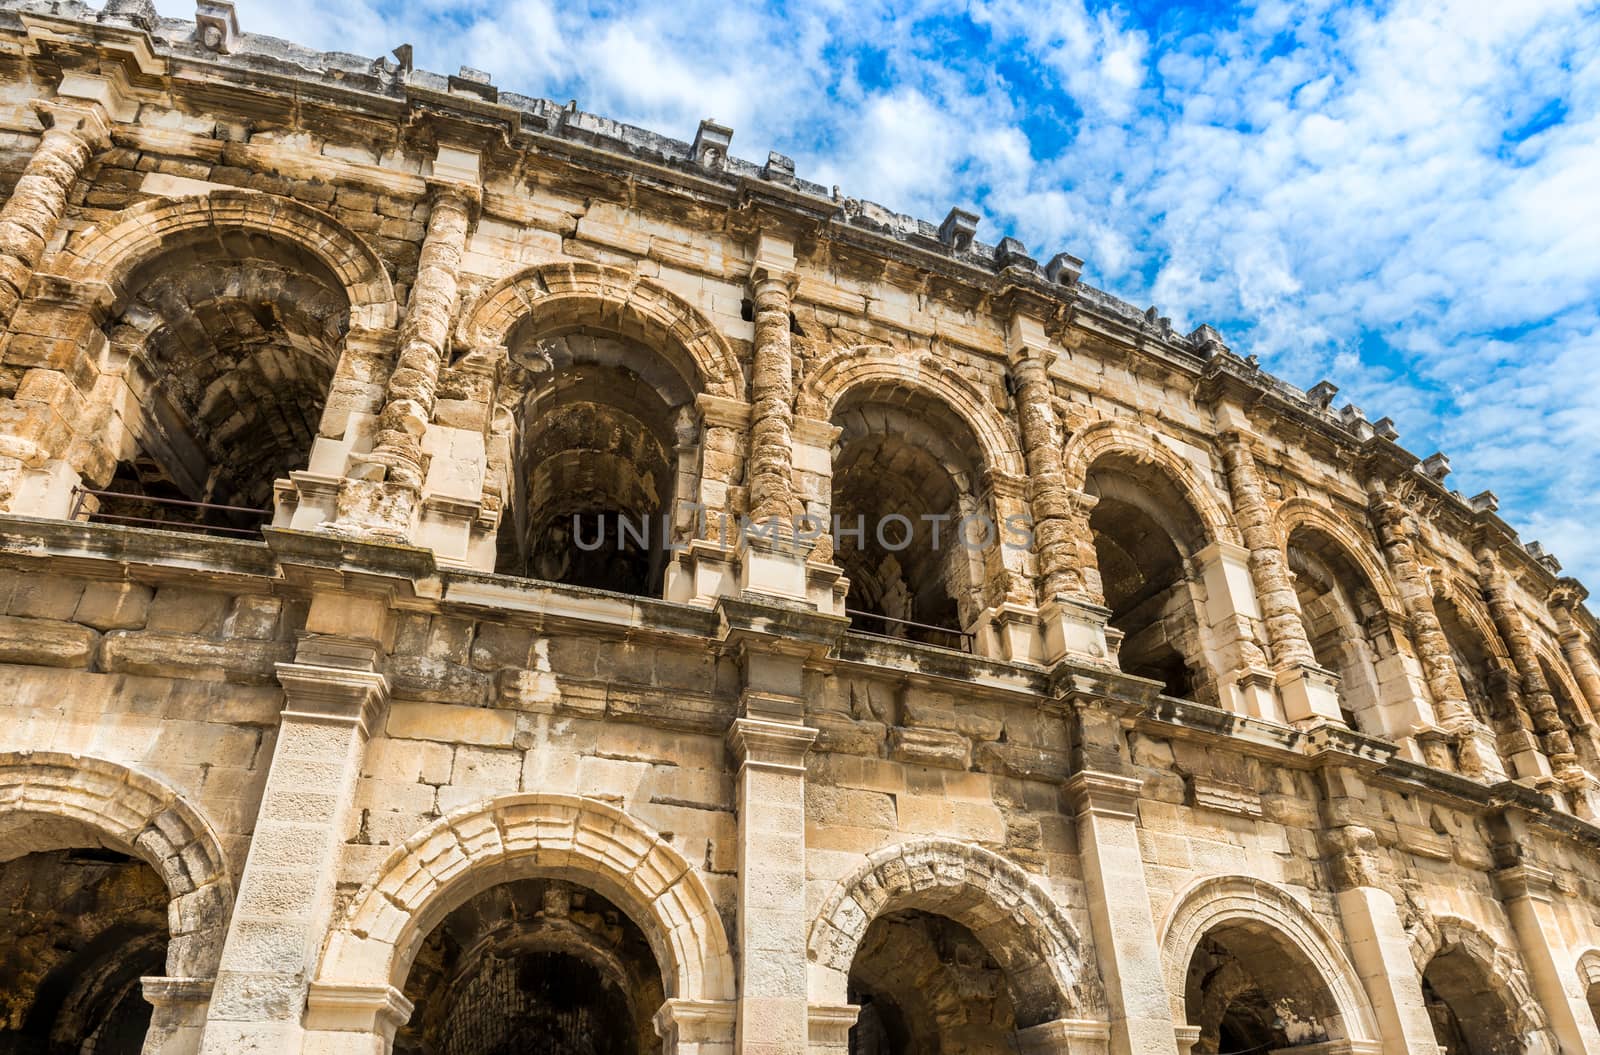 The arenas of Nîmes are a Roman amphitheater built towards the end of the 1st century in the French city of Nîmes, in the Gard.